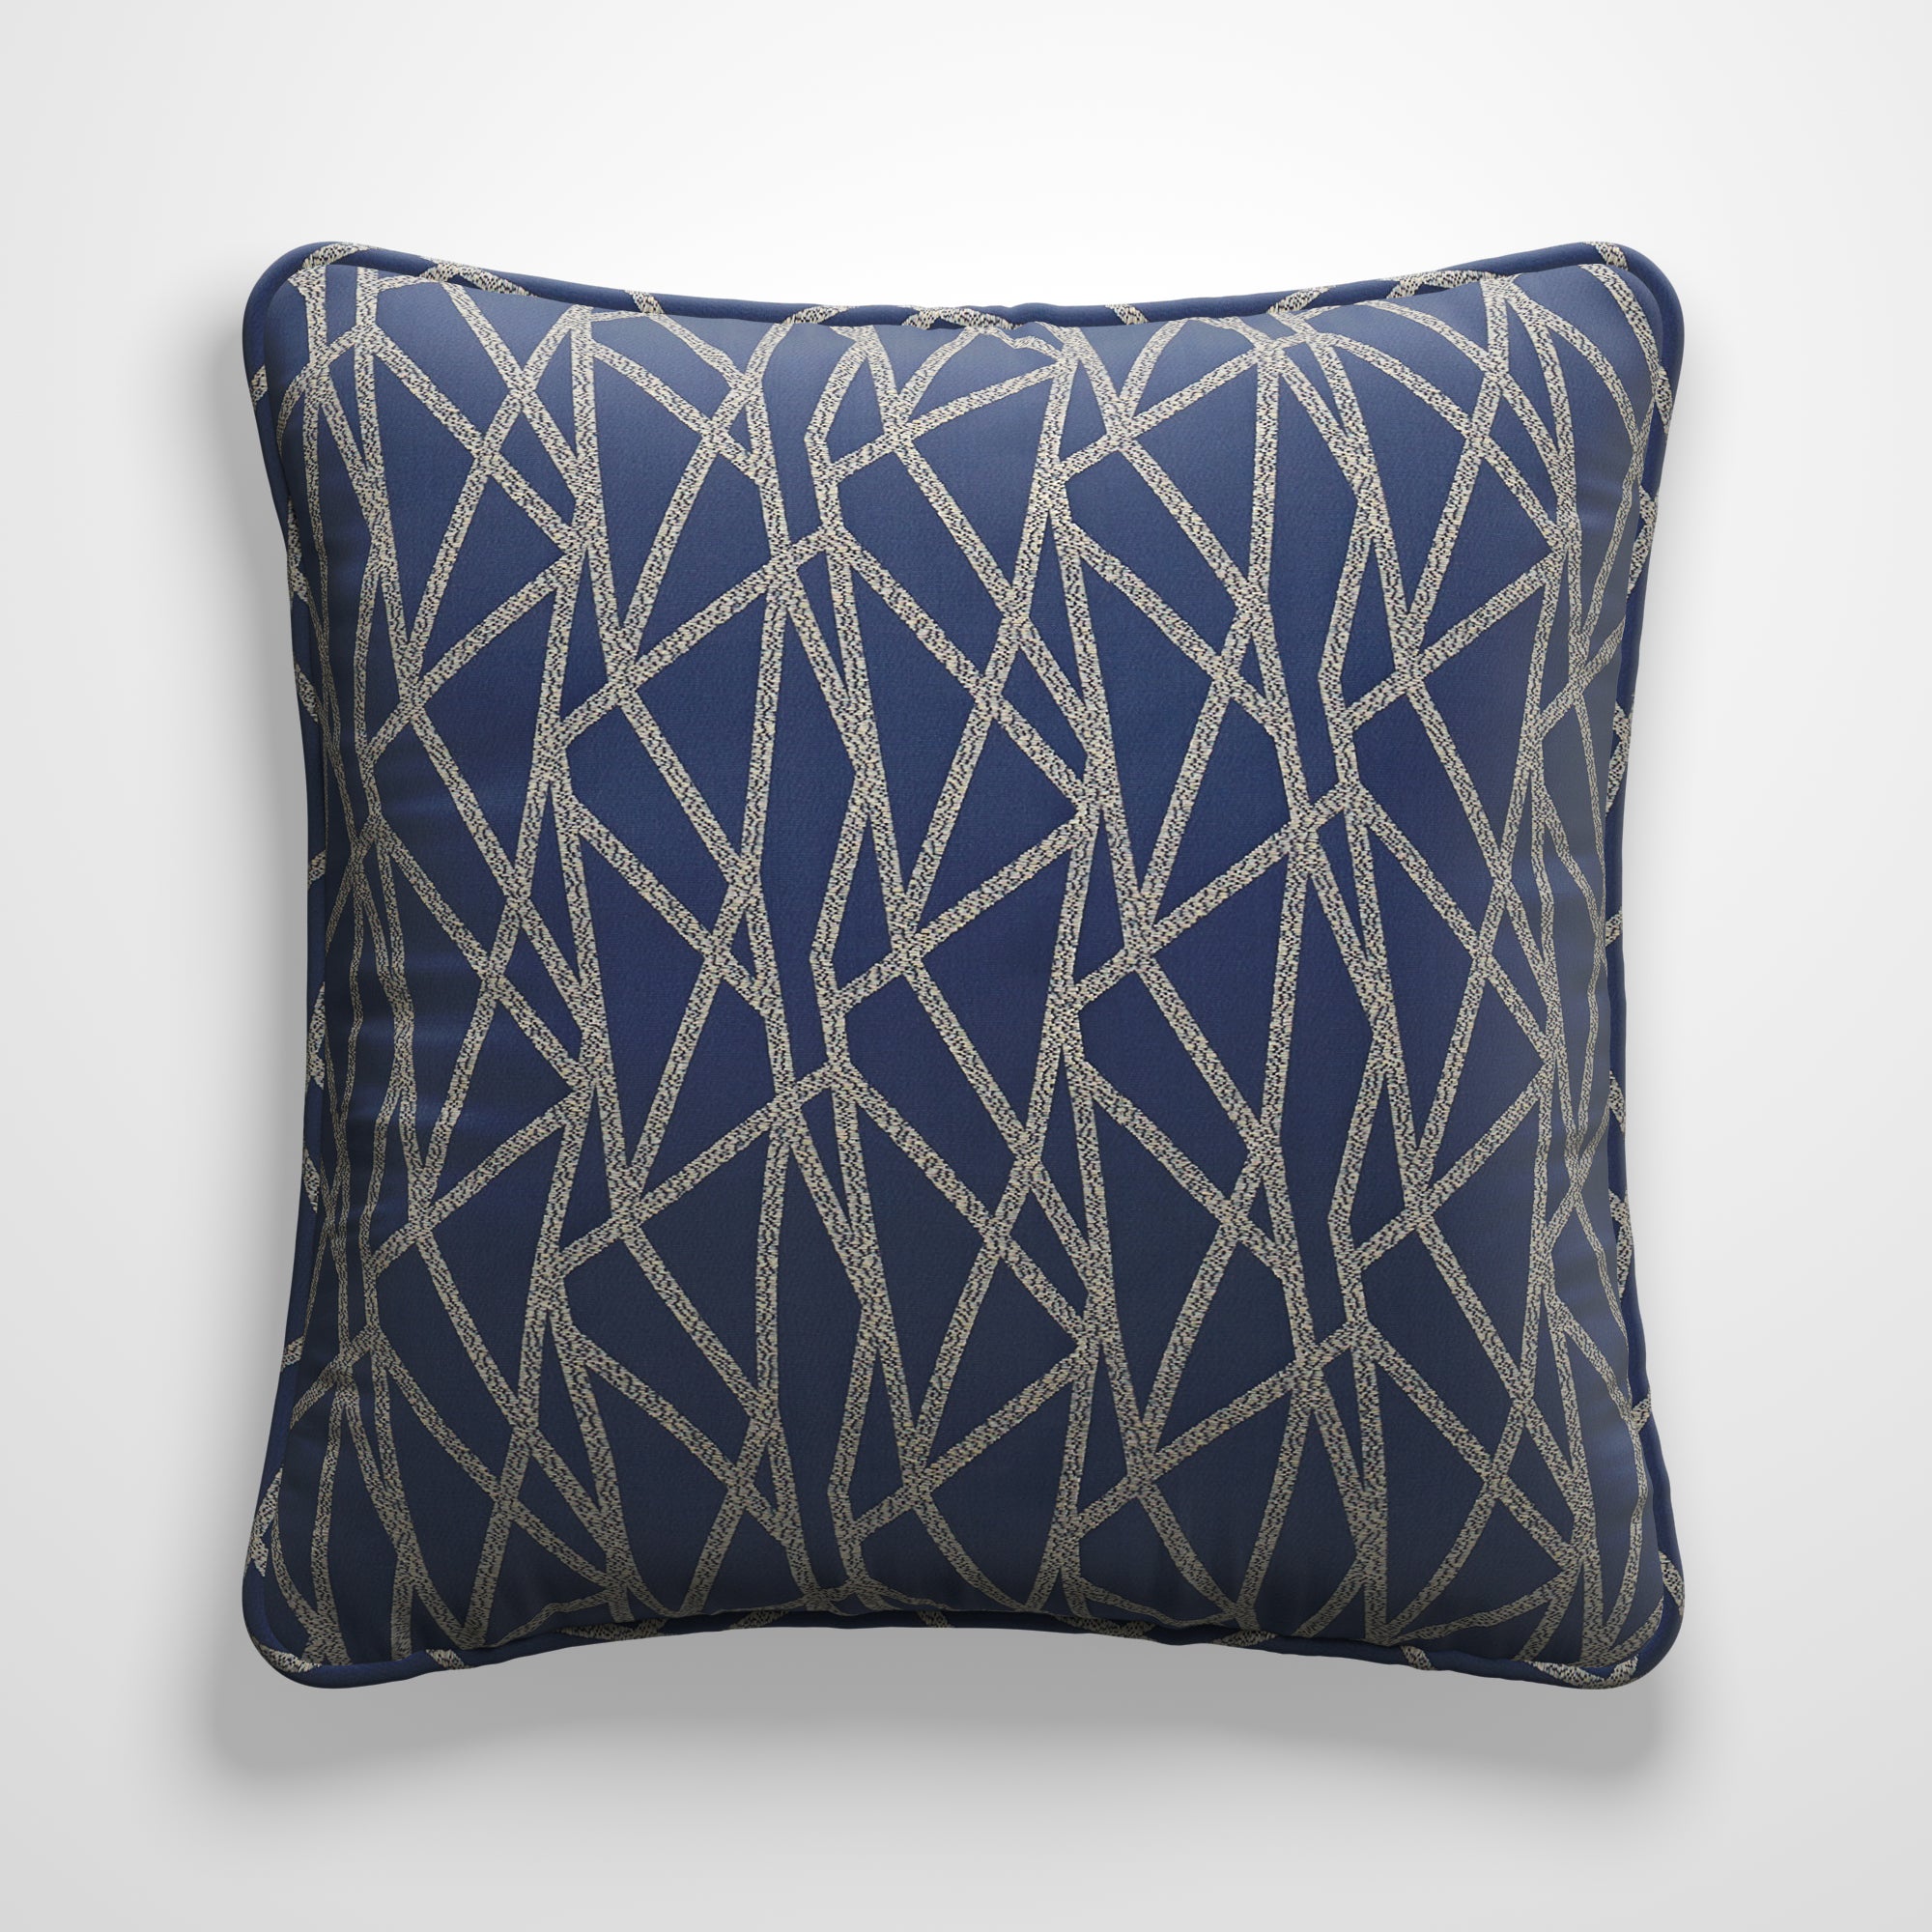 Geomo Made to Order Cushion Cover Geomo Woven Ink